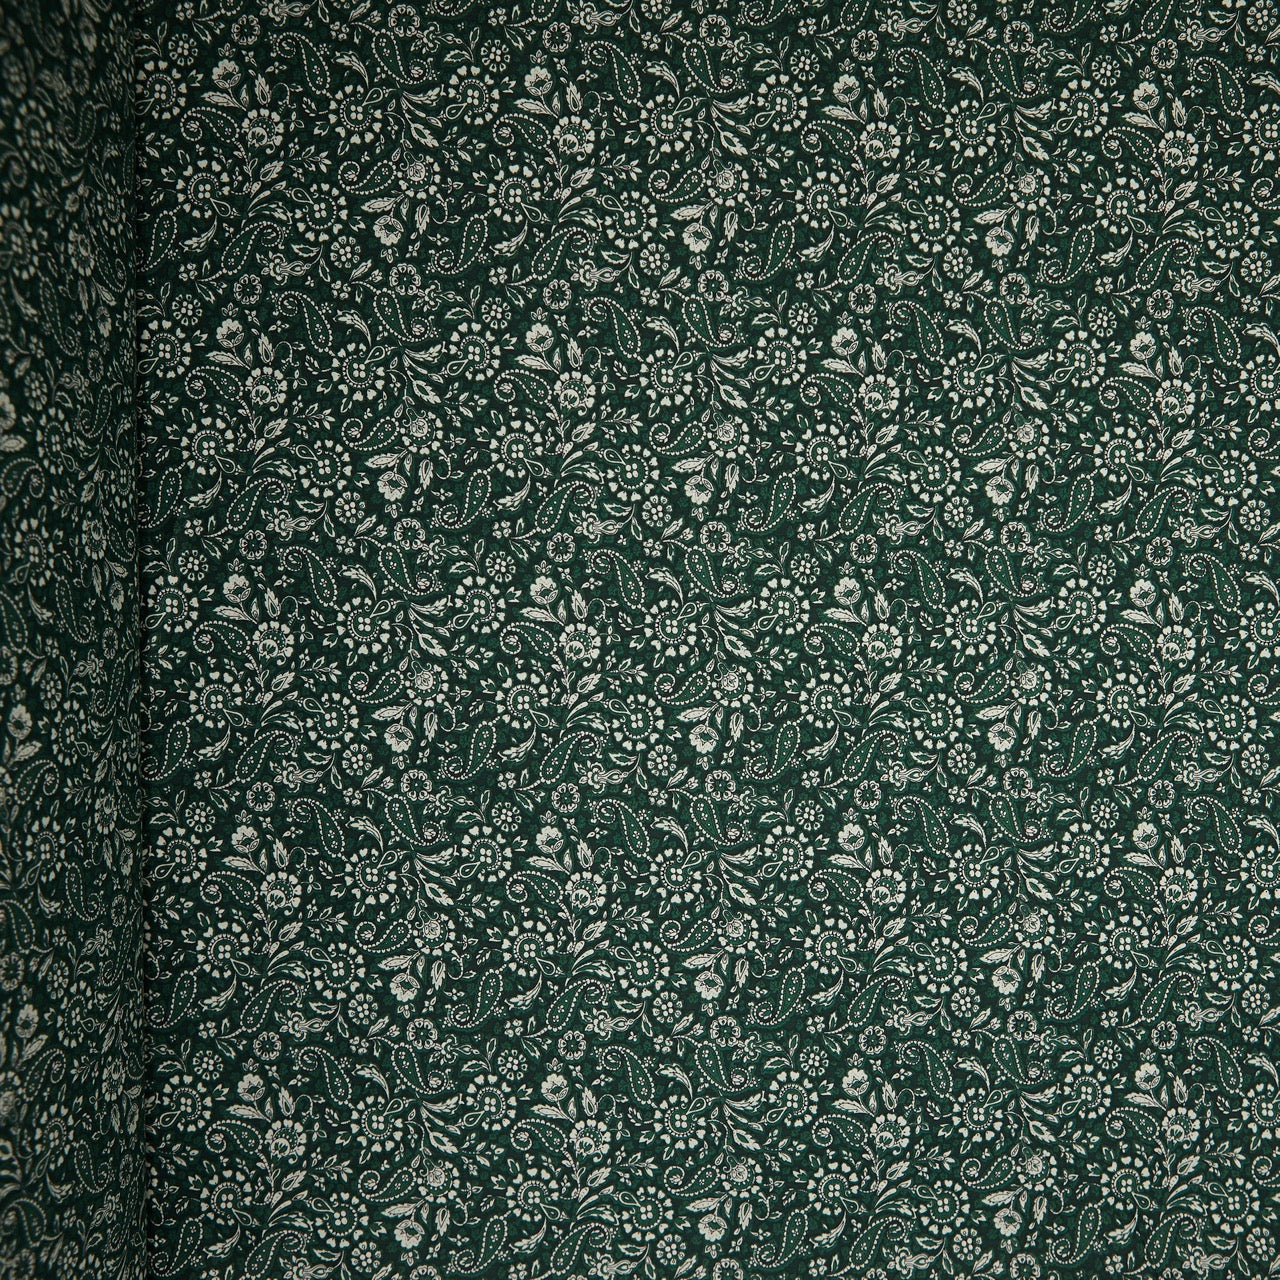 Cotton Floral - Paisley # 2 - Green (full)